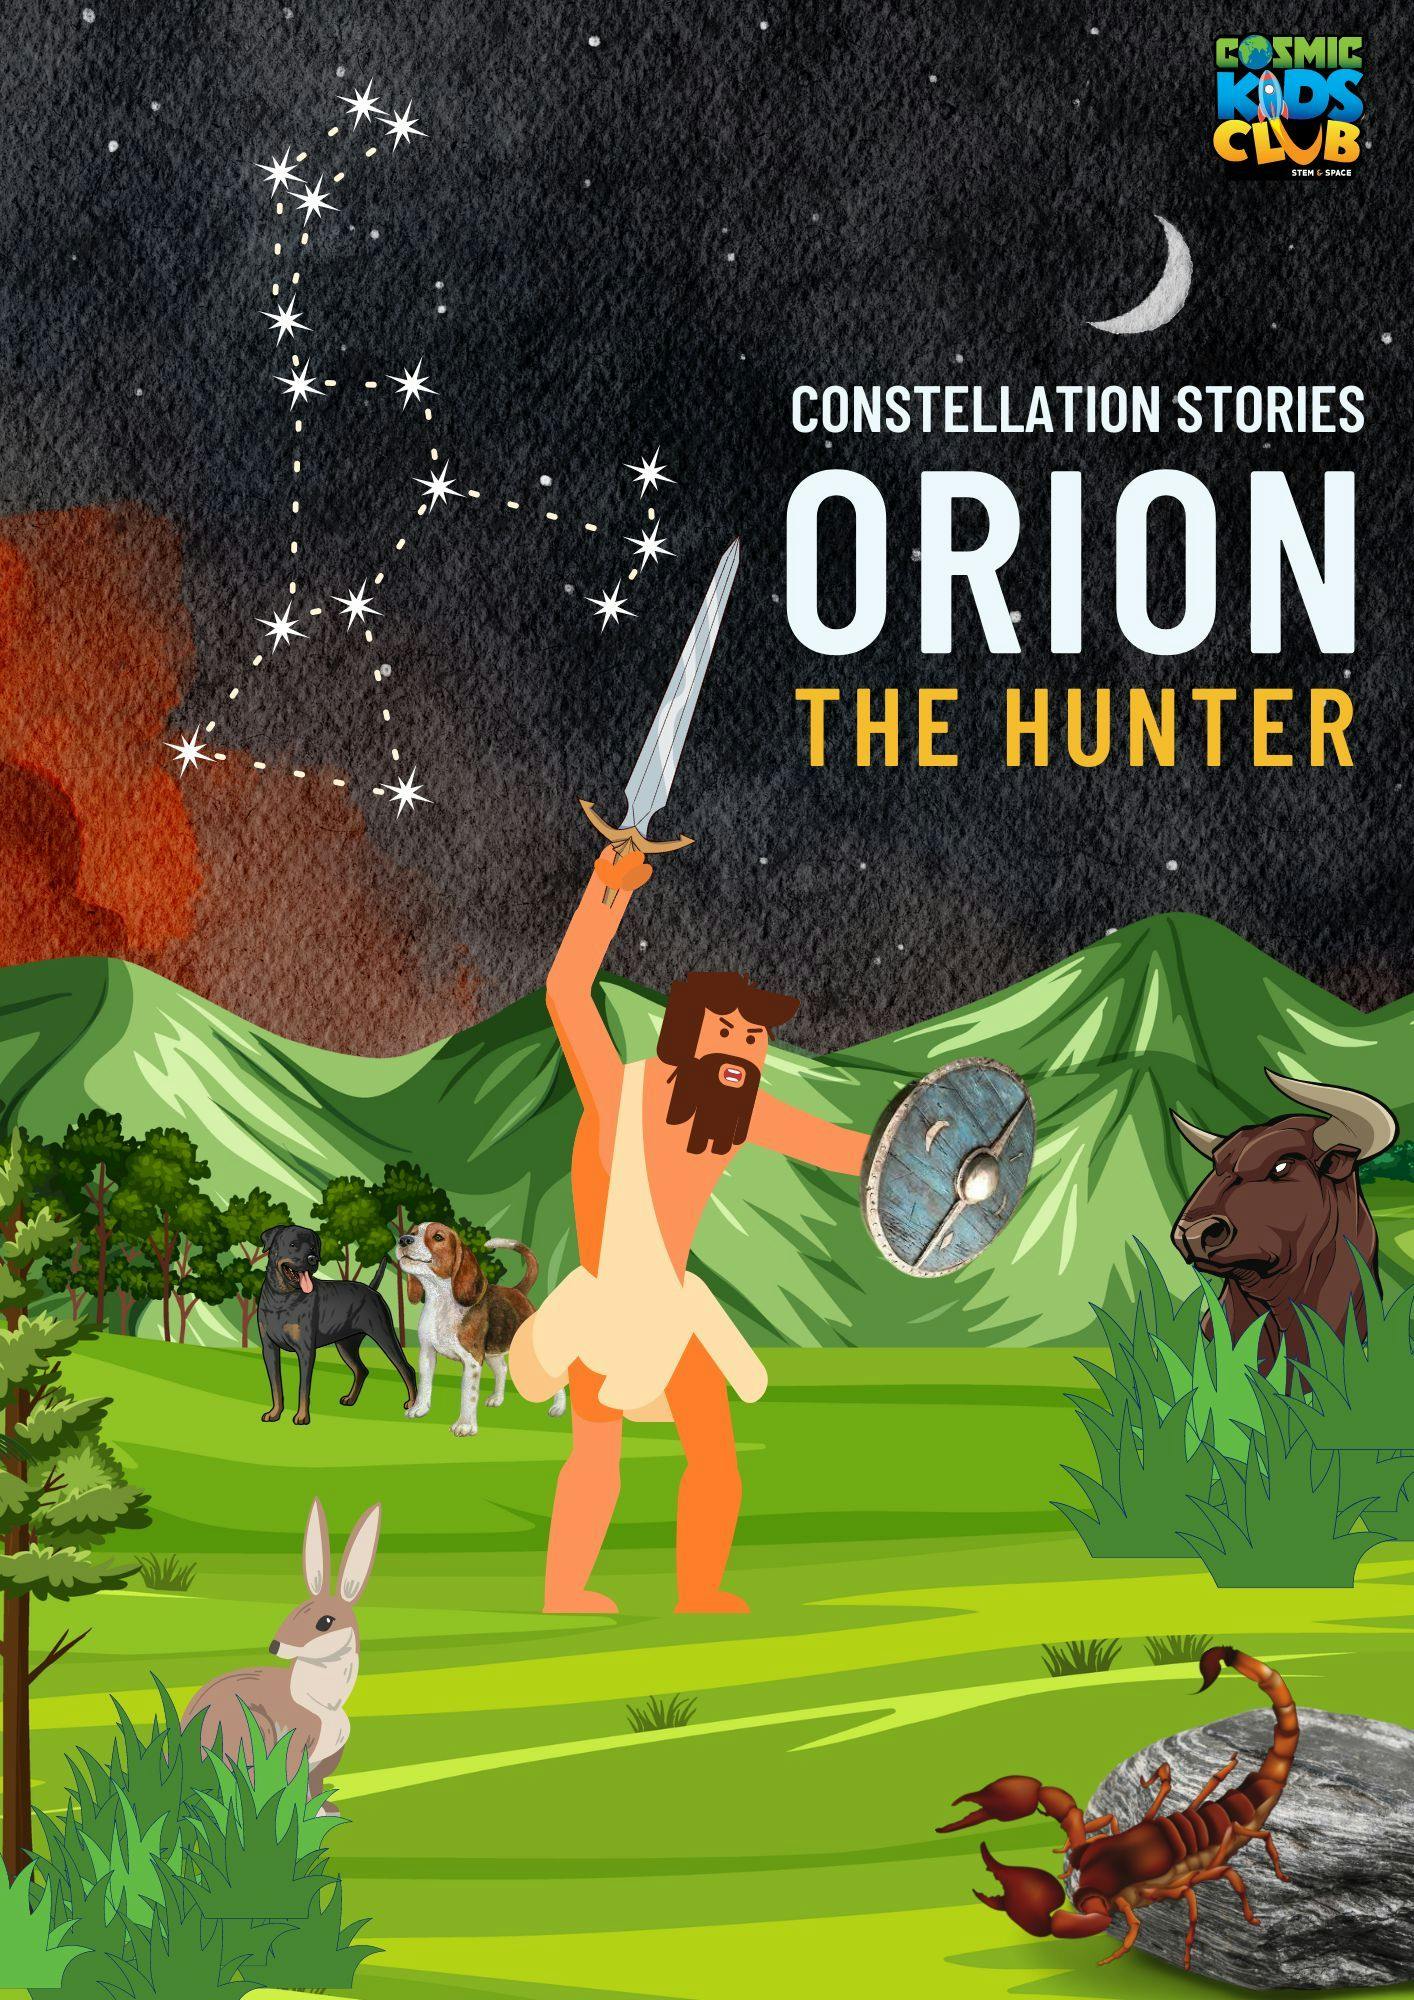 Constellation Stories- Orion the Hunter